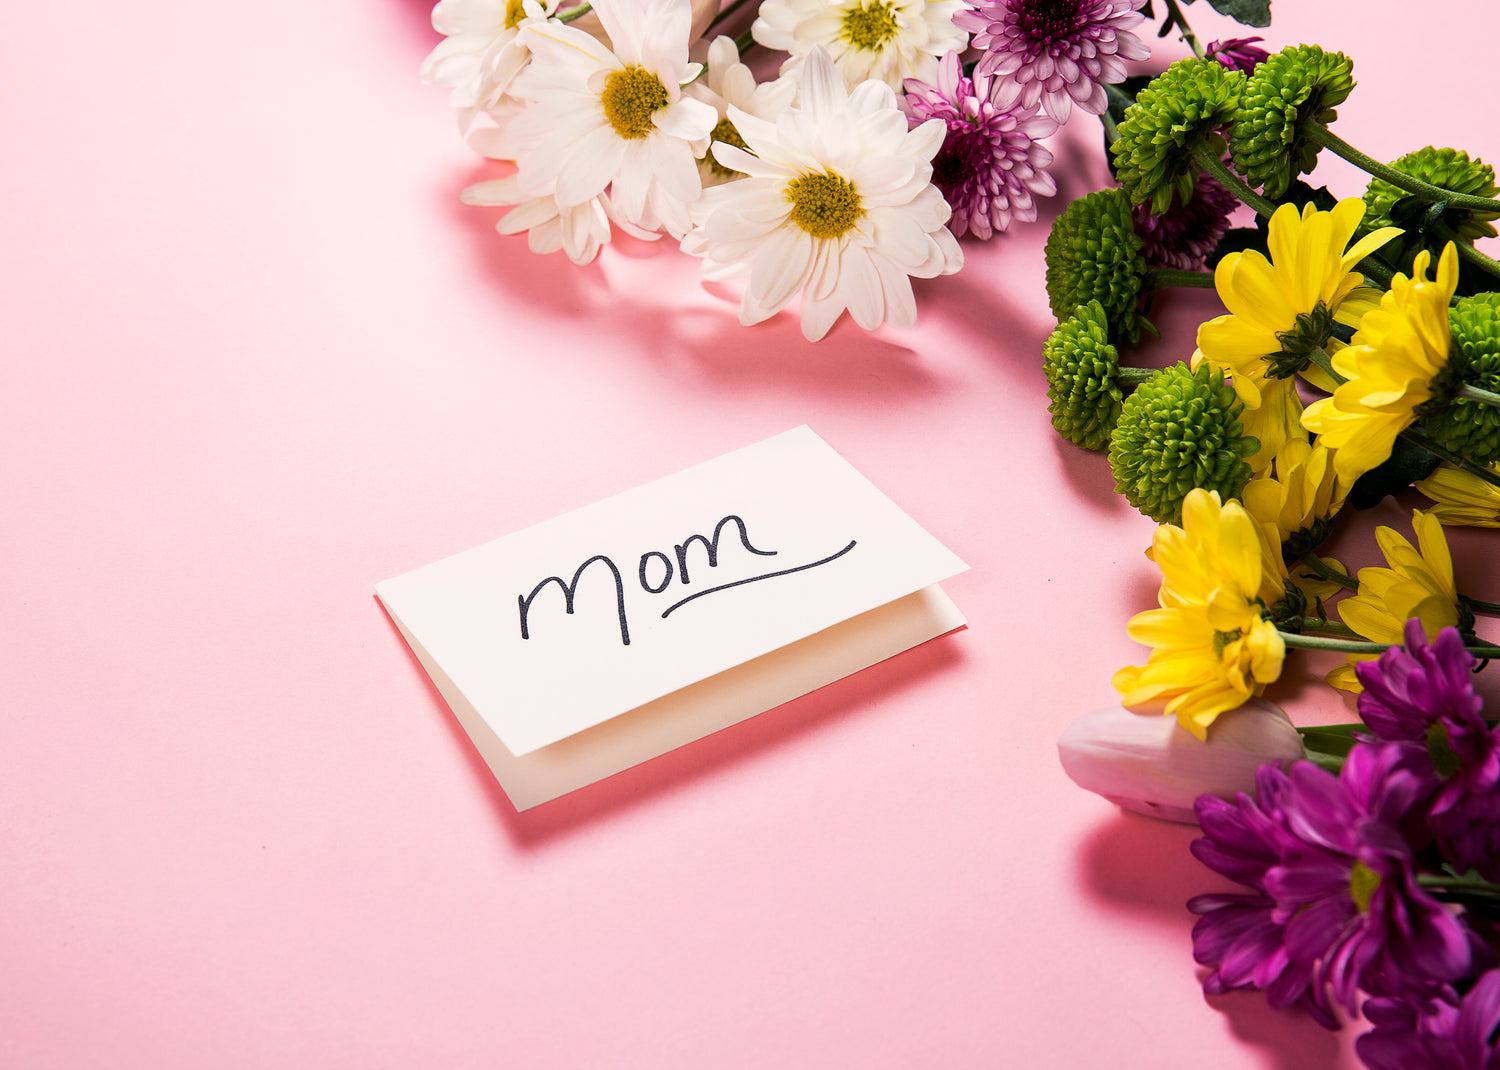 Photo of flowers and a gift card with text which reads "Mom" on the front of it